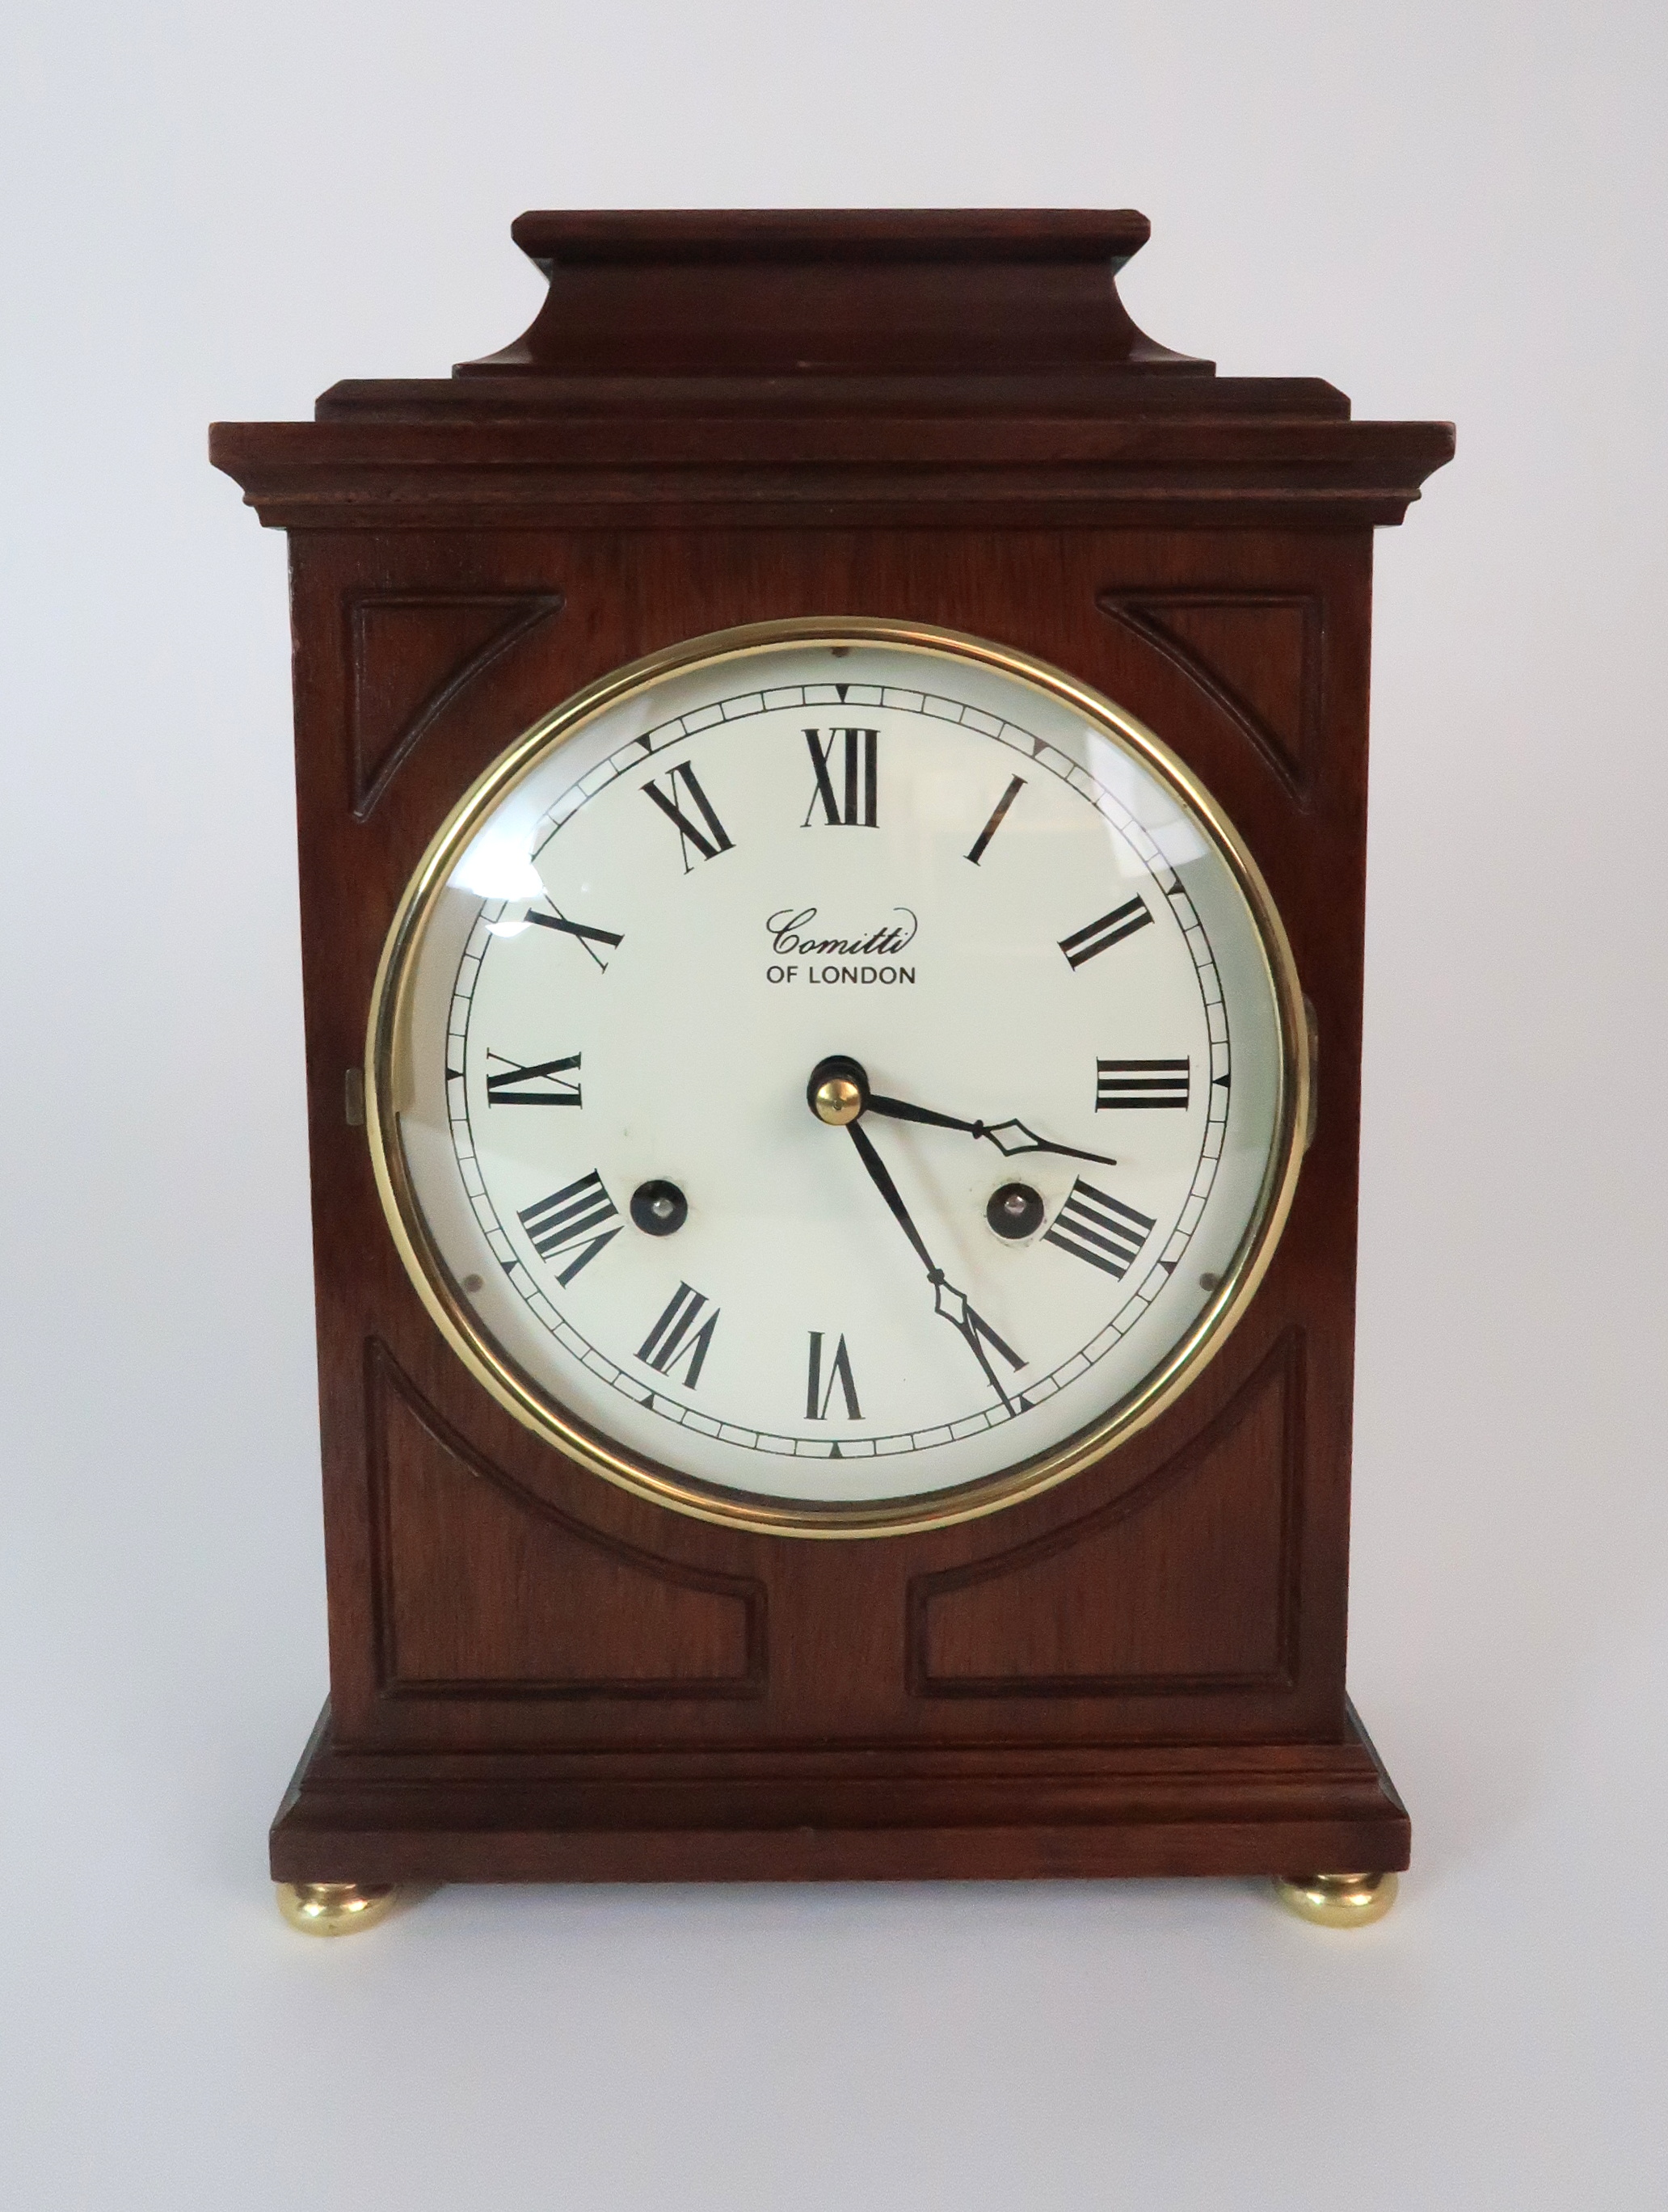 A COMITTI OF LONDON MANTLE CLOCK the wooden case with white dial and Roman numerals, the brass